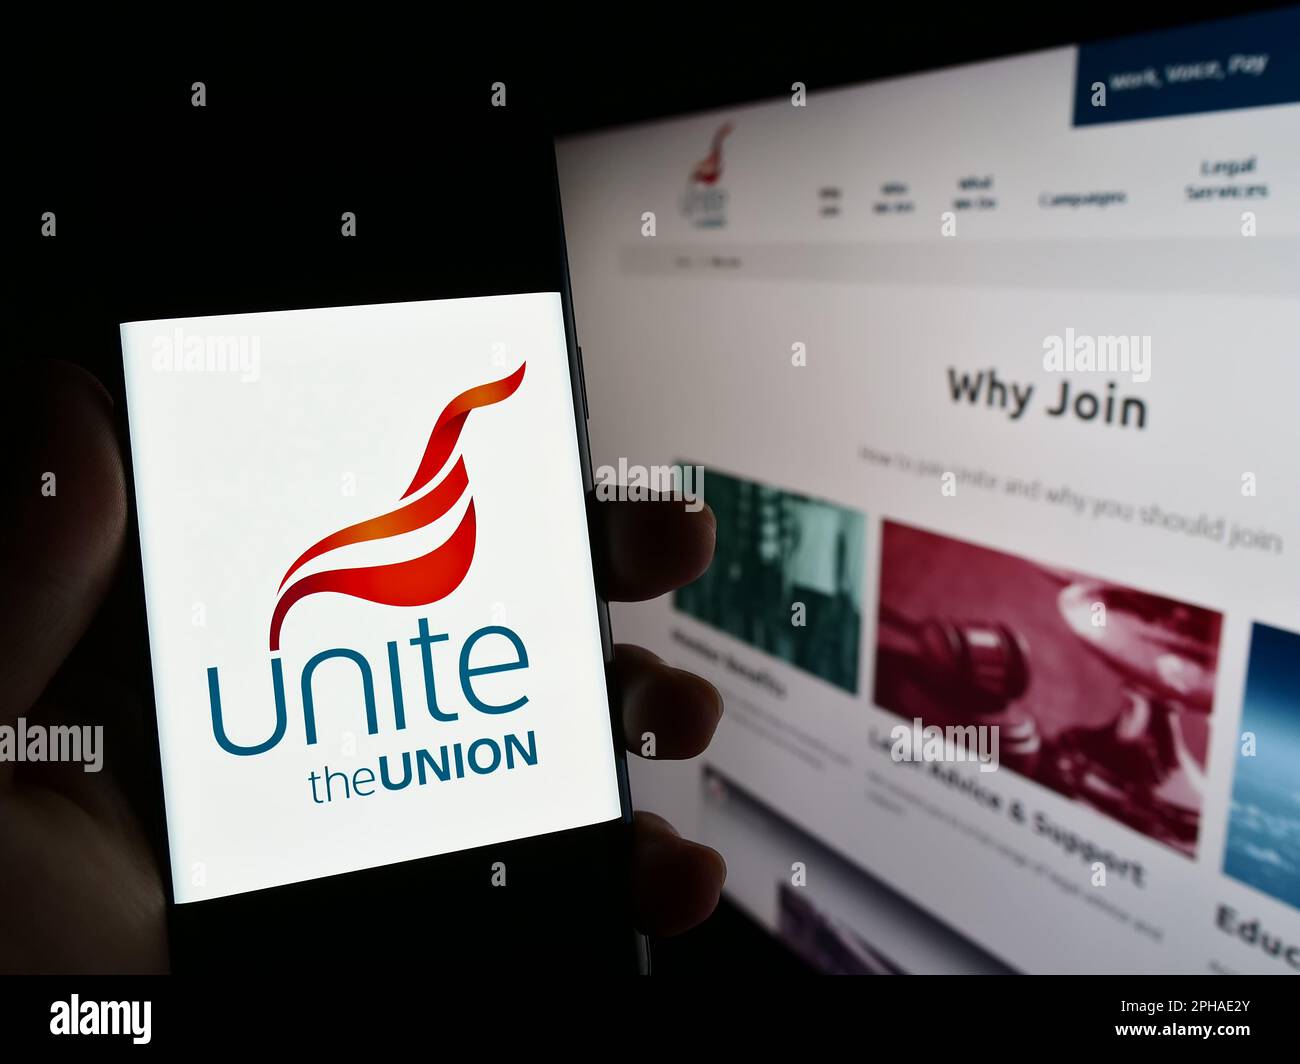 Person holding cellphone with logo of British trade union Unite the Union on screen in front of website. Focus on center of phone display. Stock Photo